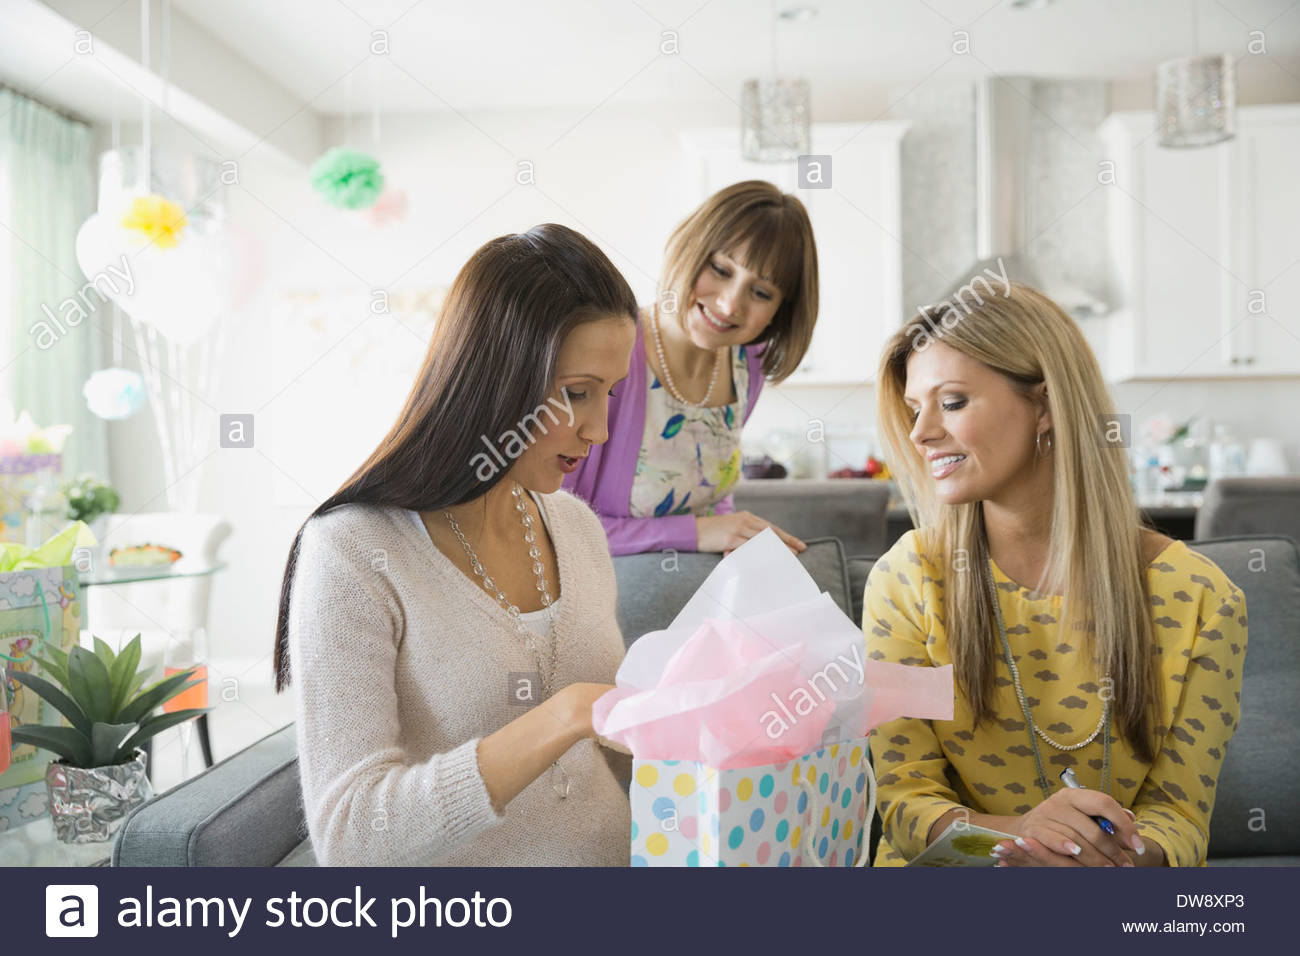 Woman opening gift at baby shower Stock Photo